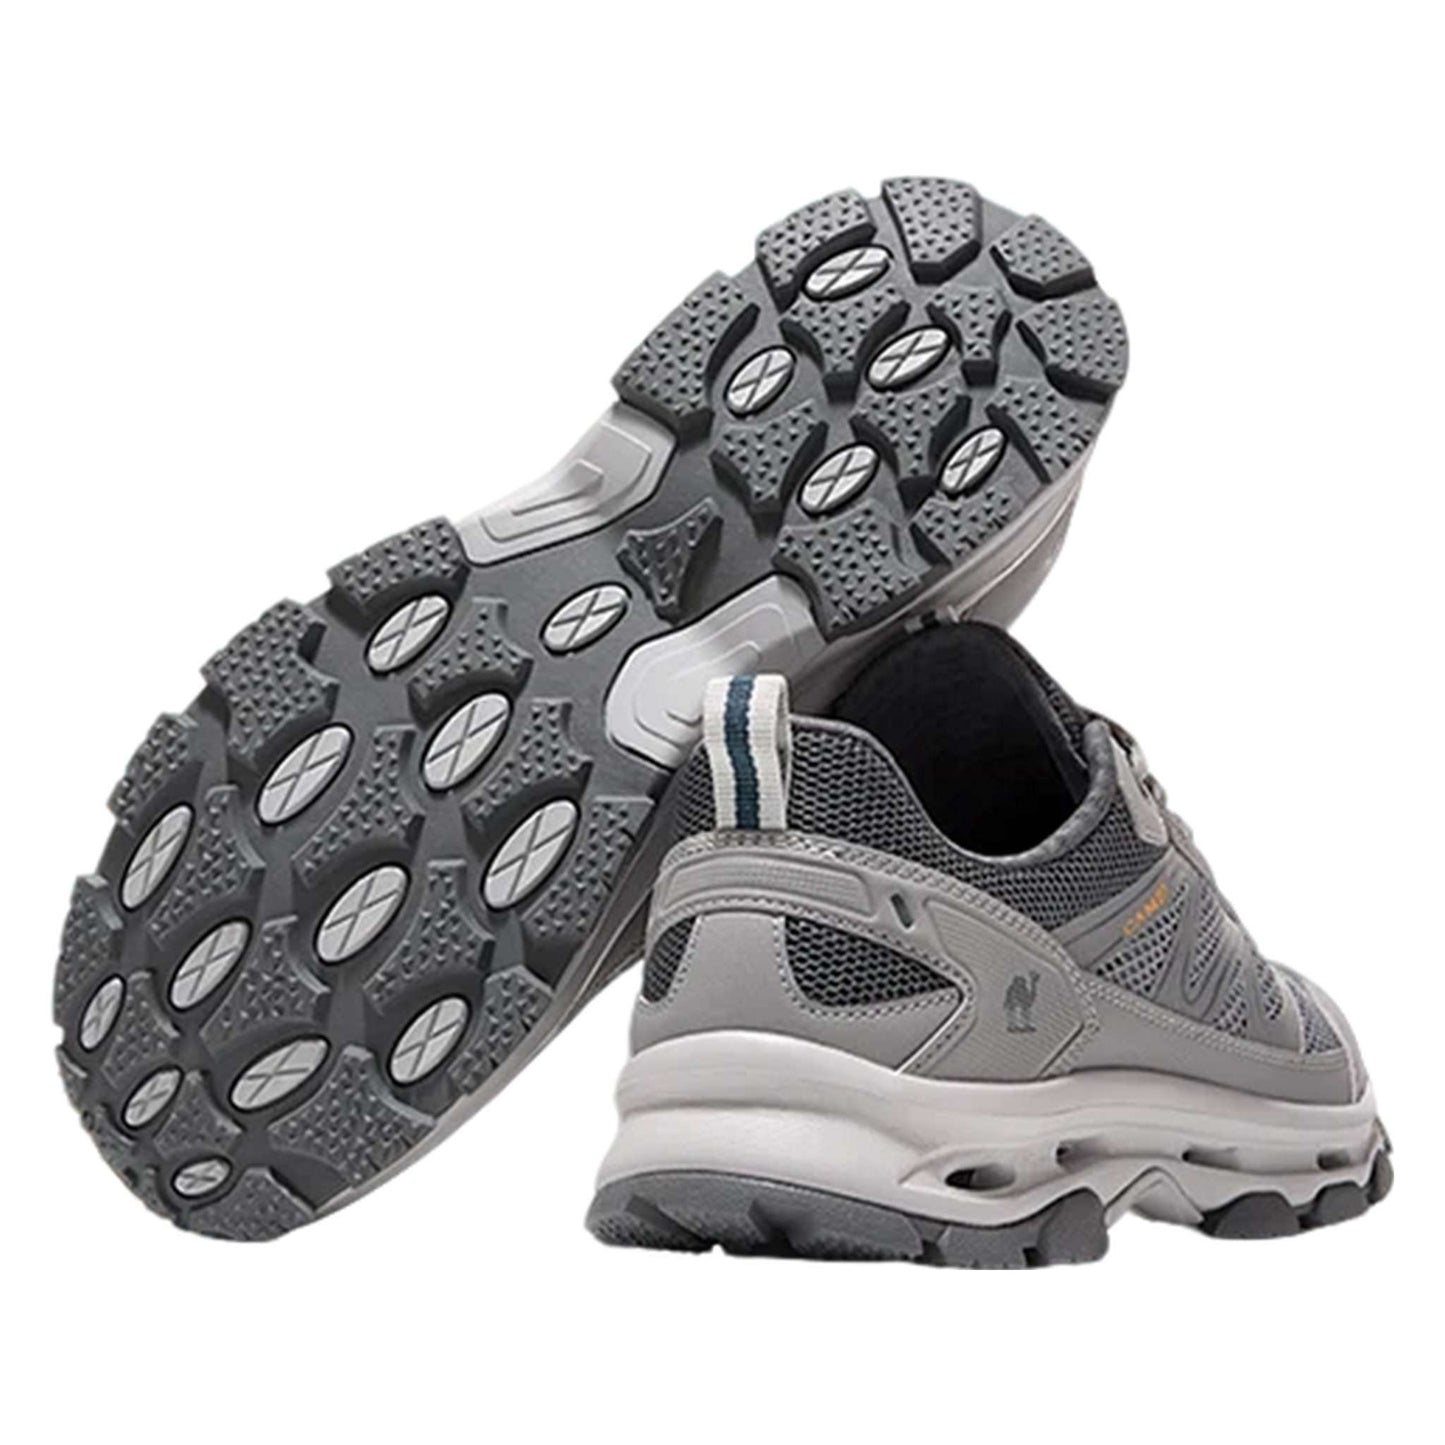 Men's Non-Slip Trail Running Shoes - Breathable Quick-Dry Outdoor Performance Footwear